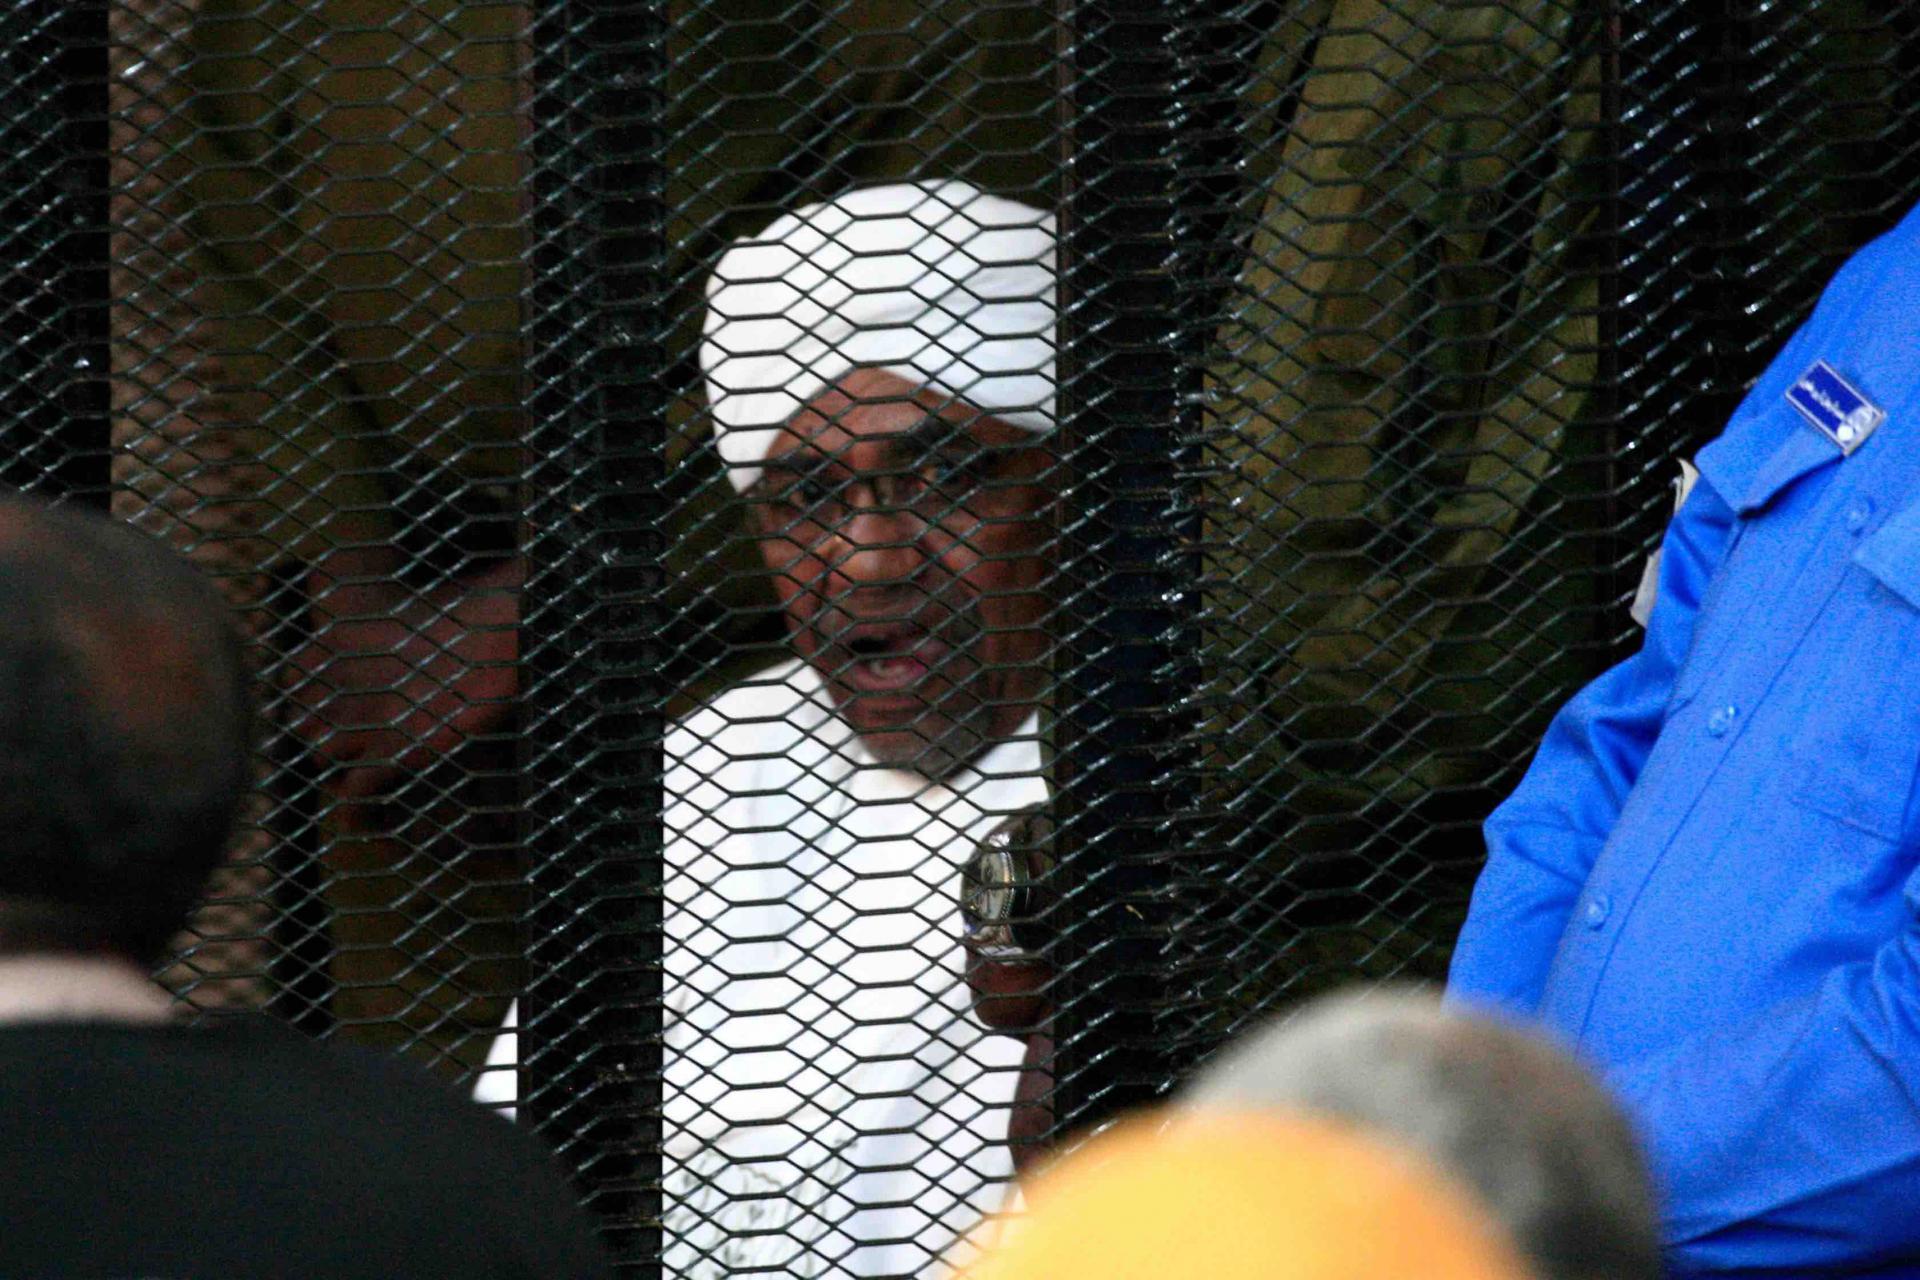 The former Sudanese leader is wanted by the International Criminal Court in The Hague over his role in mass killings